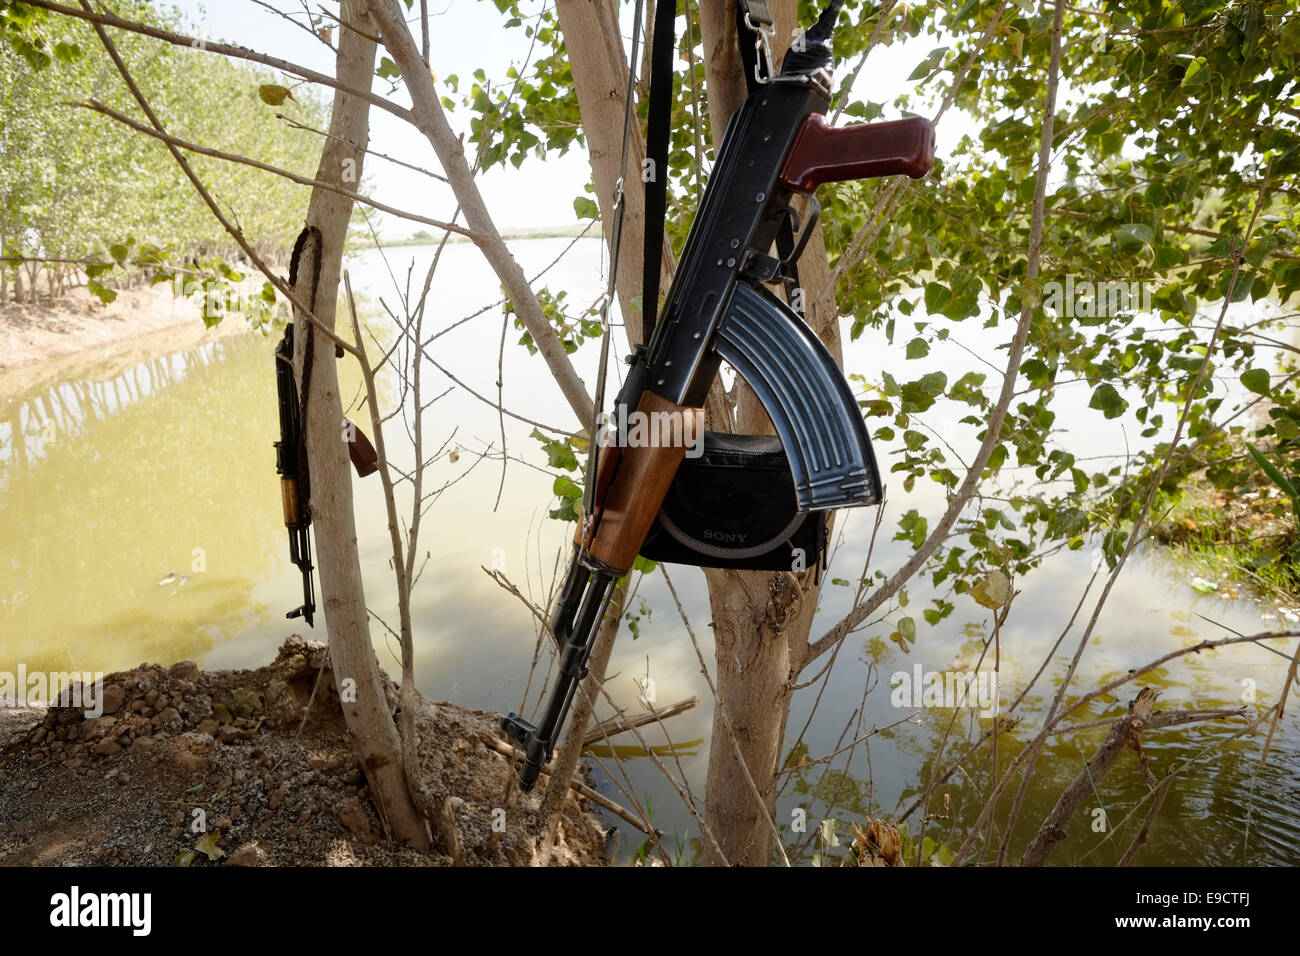 A Kalashnikov ak-47 gun rifle hanging on a tree in a front line outpost of the People's Defense Forces HPG the military wing of the Kurdistan Workers' Party PKK during a battle against ISIS or ISIL militants near the city of Kirkuk in northern Iraq Stock Photo